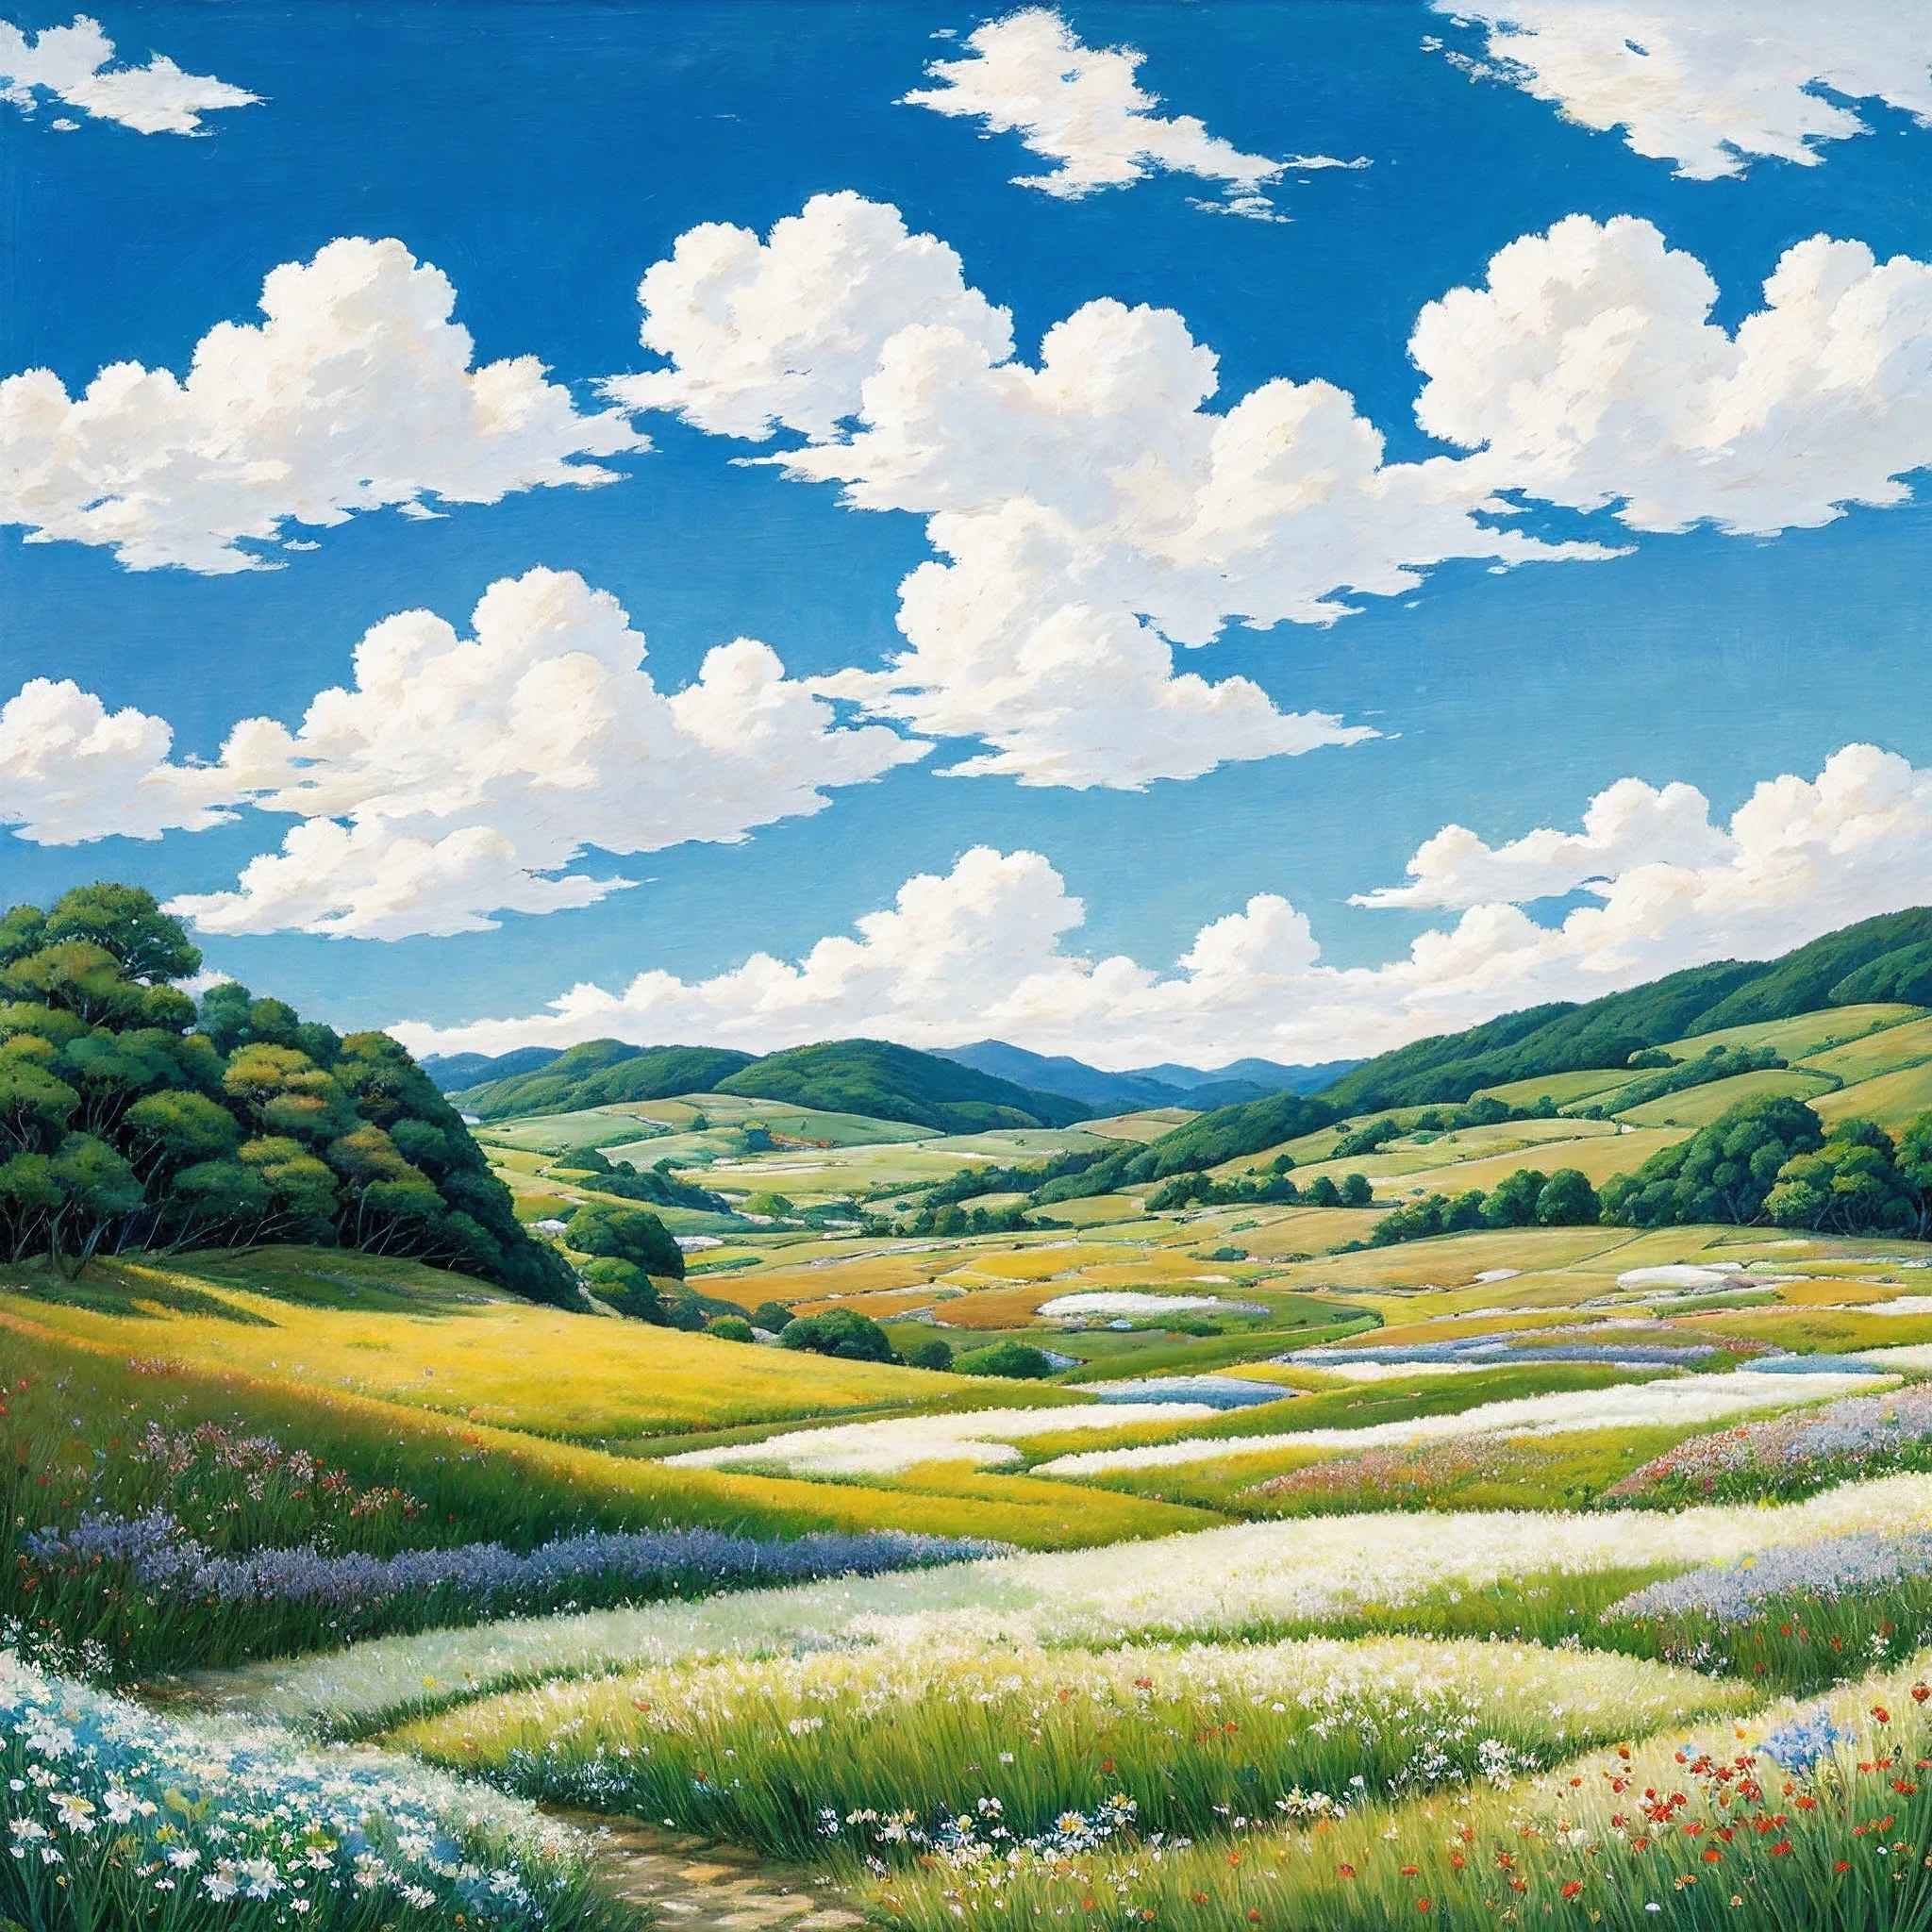 Realistic, authentic, beautiful and amazing landscape oil painting Studio Ghibli Hayao Miyazaki&#39;s petal grassland with blue sky and white clouds